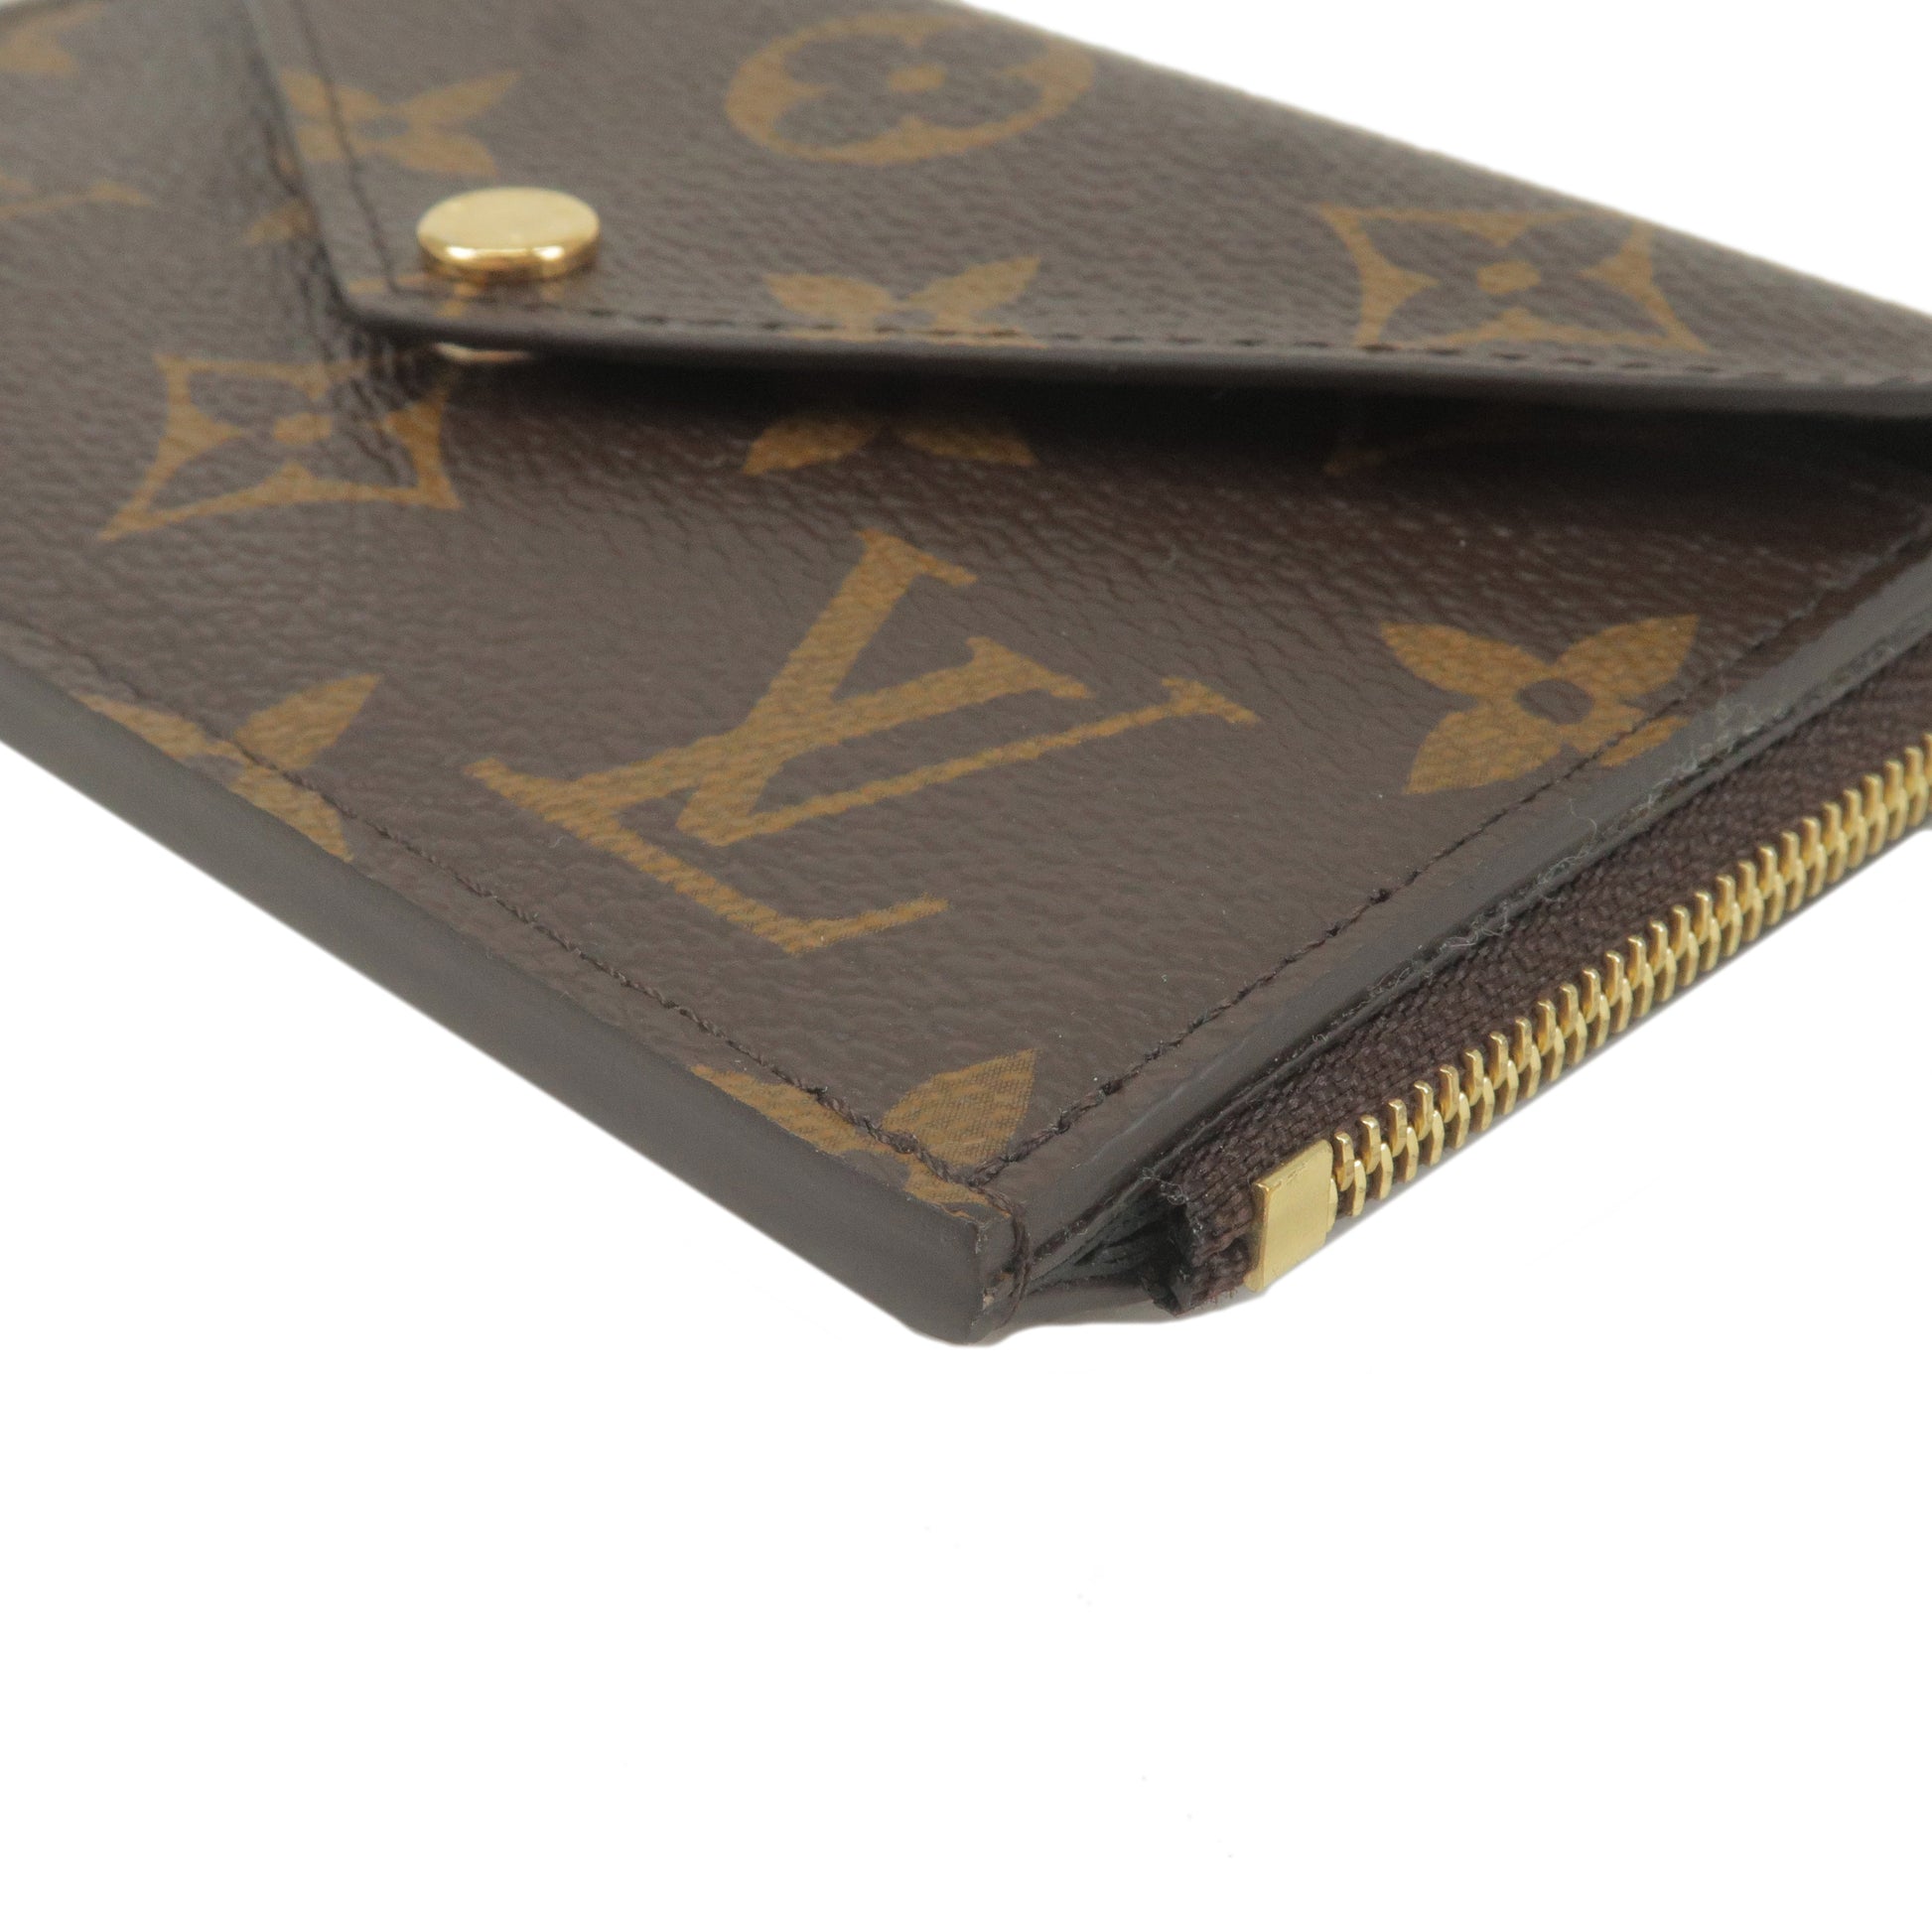 Louis Vuitton Recto Verso Card Holder: WHAT FITS INSIDE & COMPARISONS 